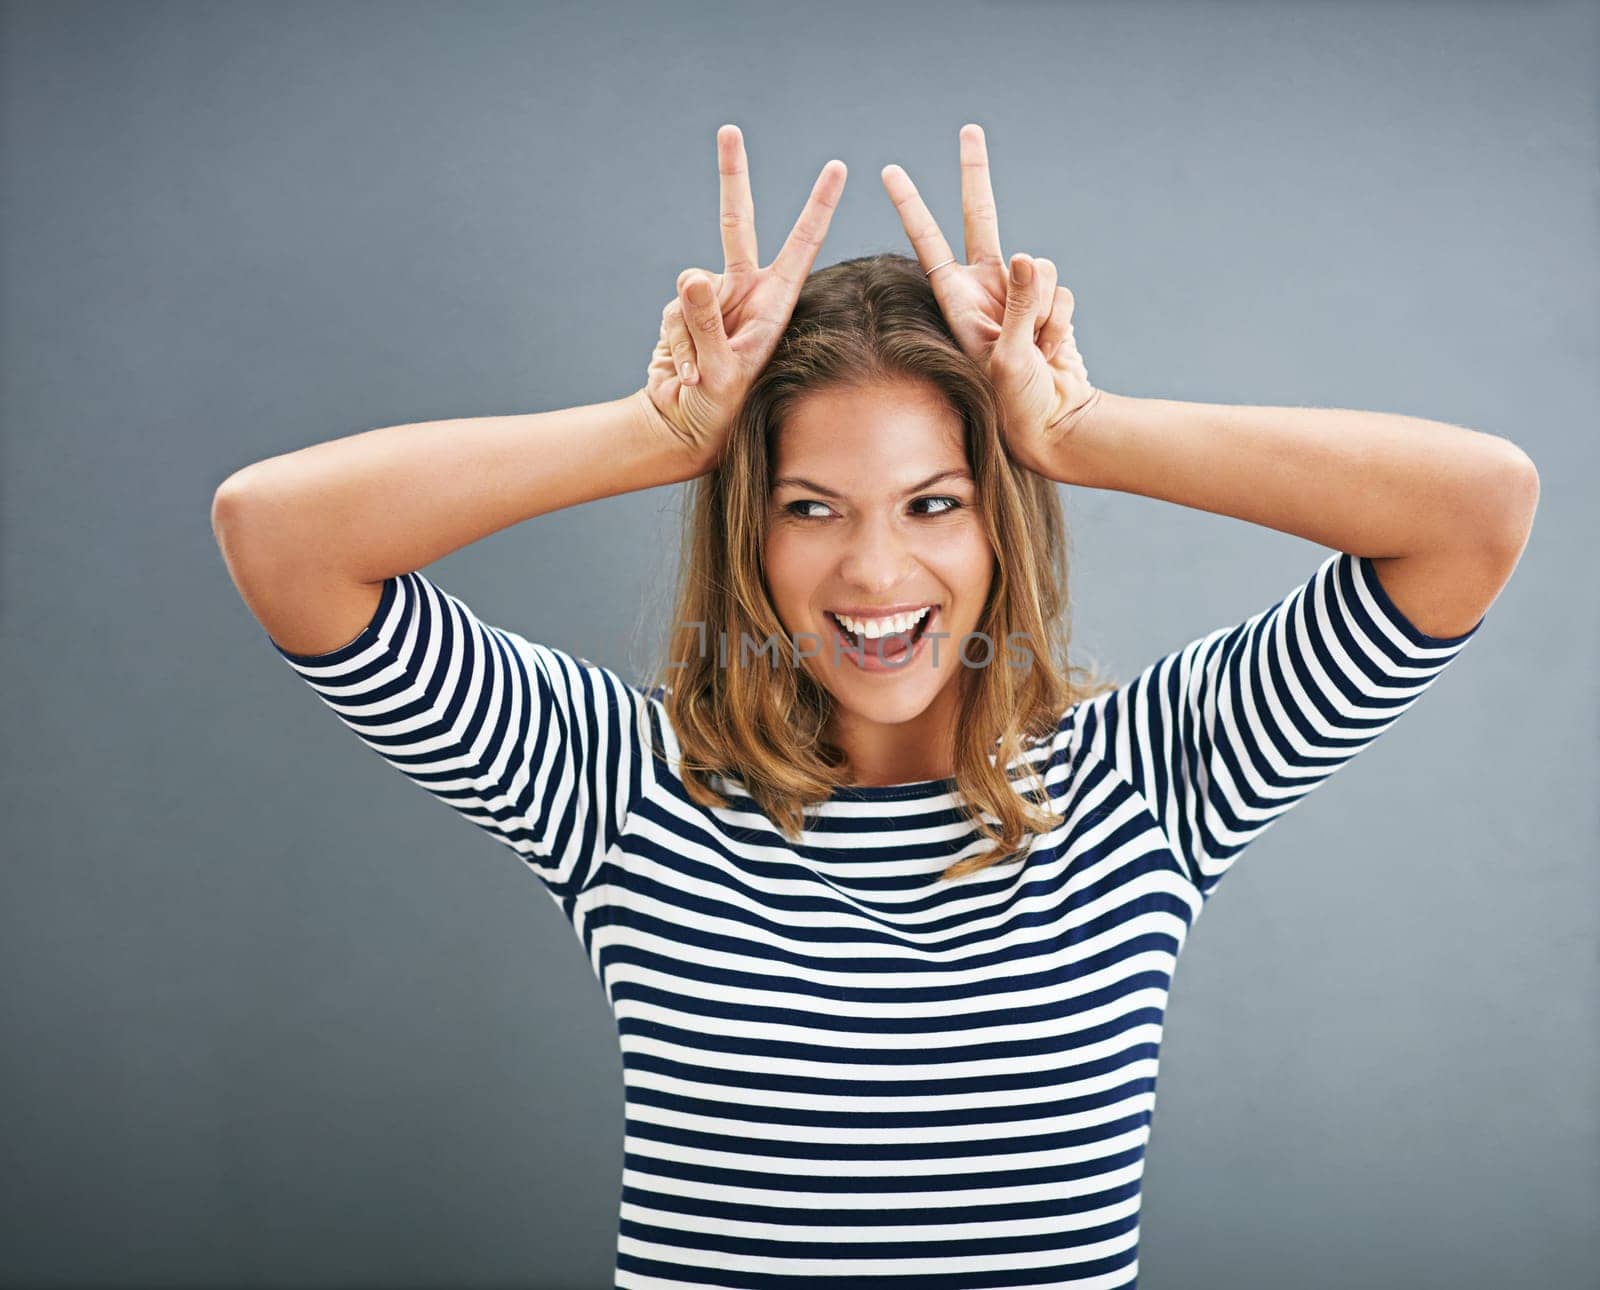 Woman, bunny ears and fingers in studio for funny joke, happy and play on gray background. Female person, emoji and rabbit icon or symbol for comedy, comic gesture and mockup space for easter humor.